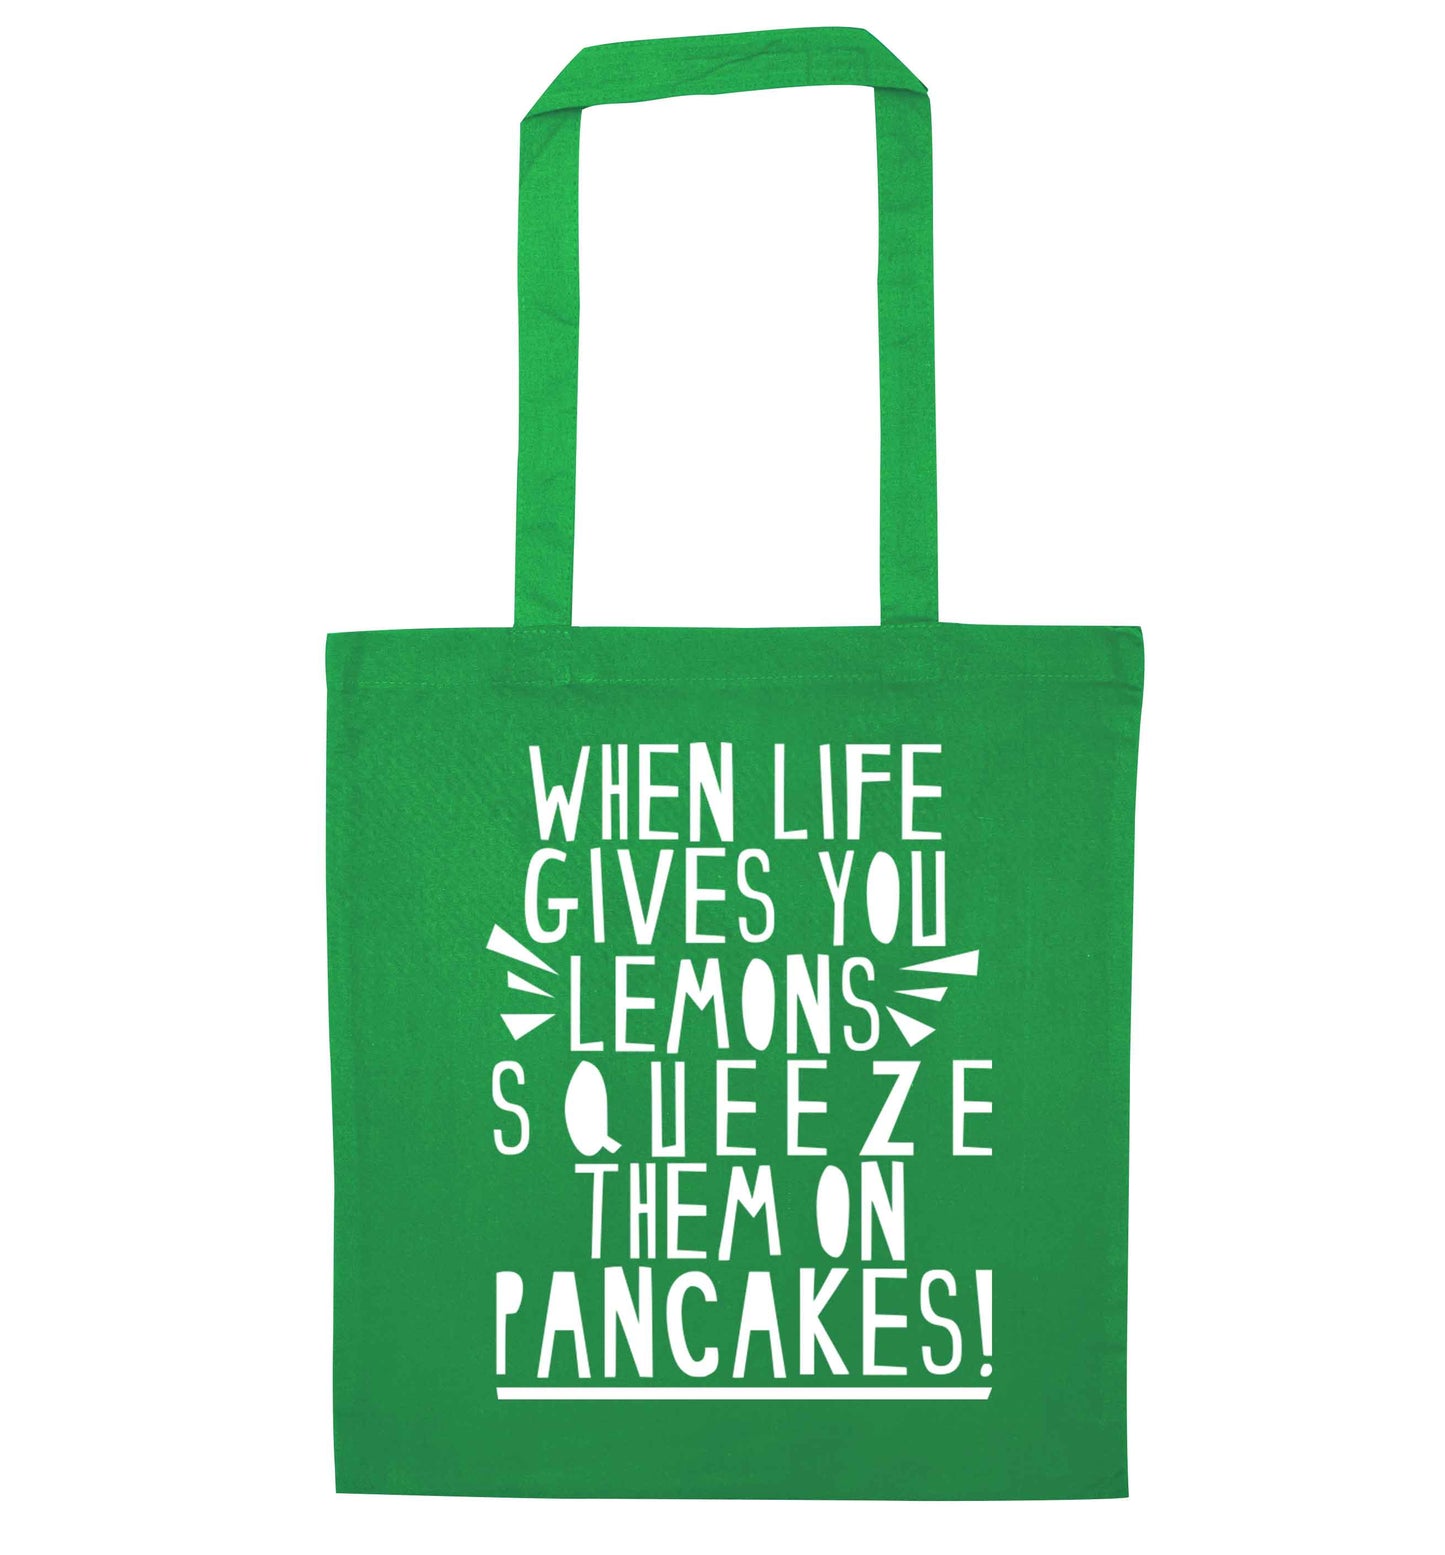 When life gives you lemons squeeze them on pancakes! green tote bag